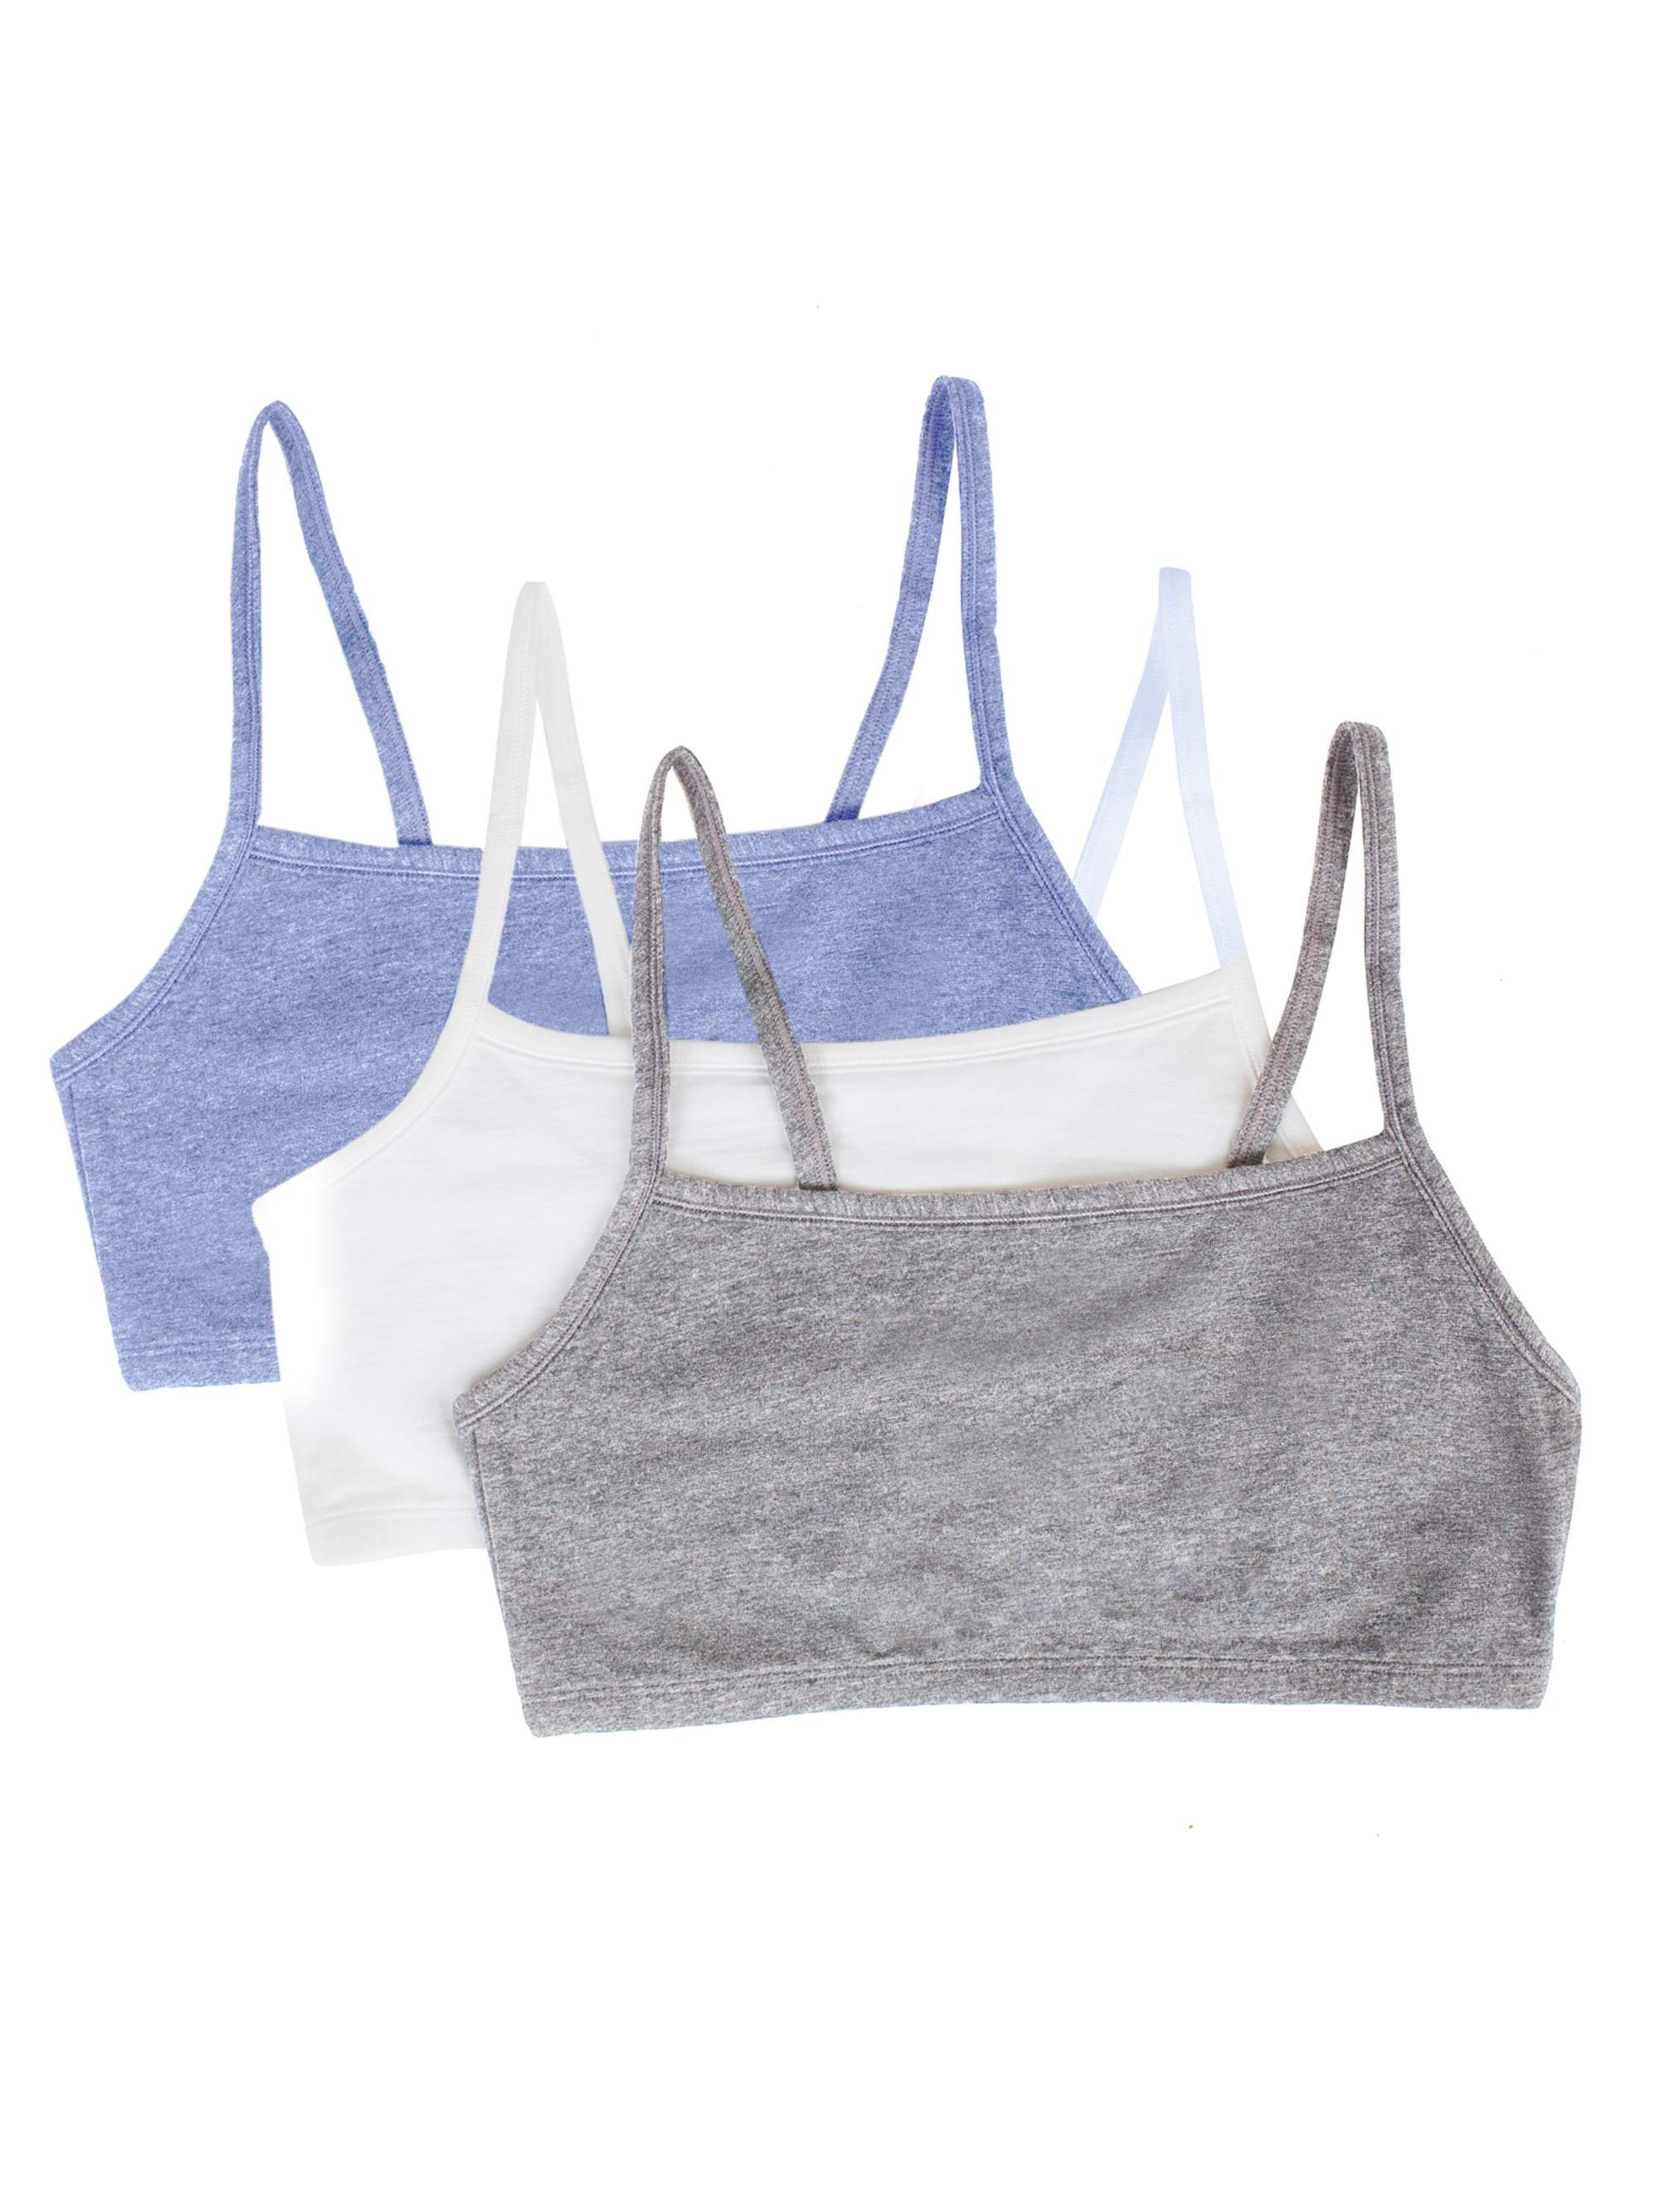 Fruit of the Loom Women's Spaghetti Strap Cotton Sports Bra, 3-Pack, Style-9036 - image 1 of 9